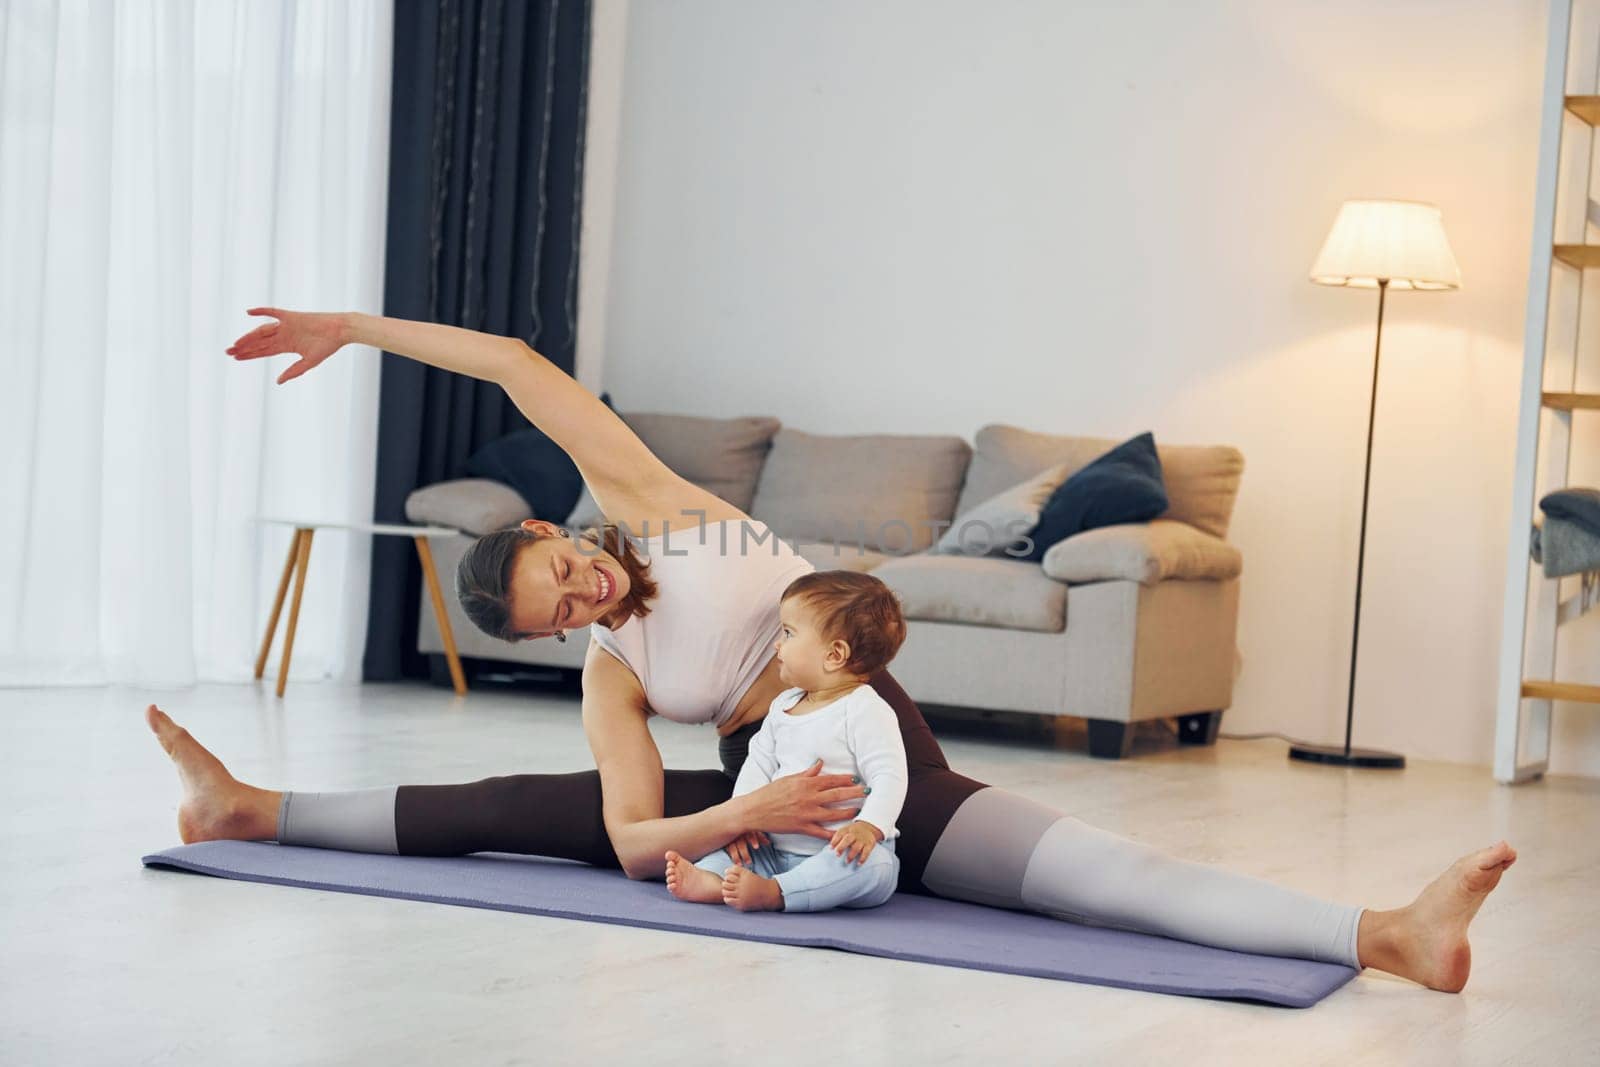 Doing fitness together. Mother with her little daughter is at home together by Standret